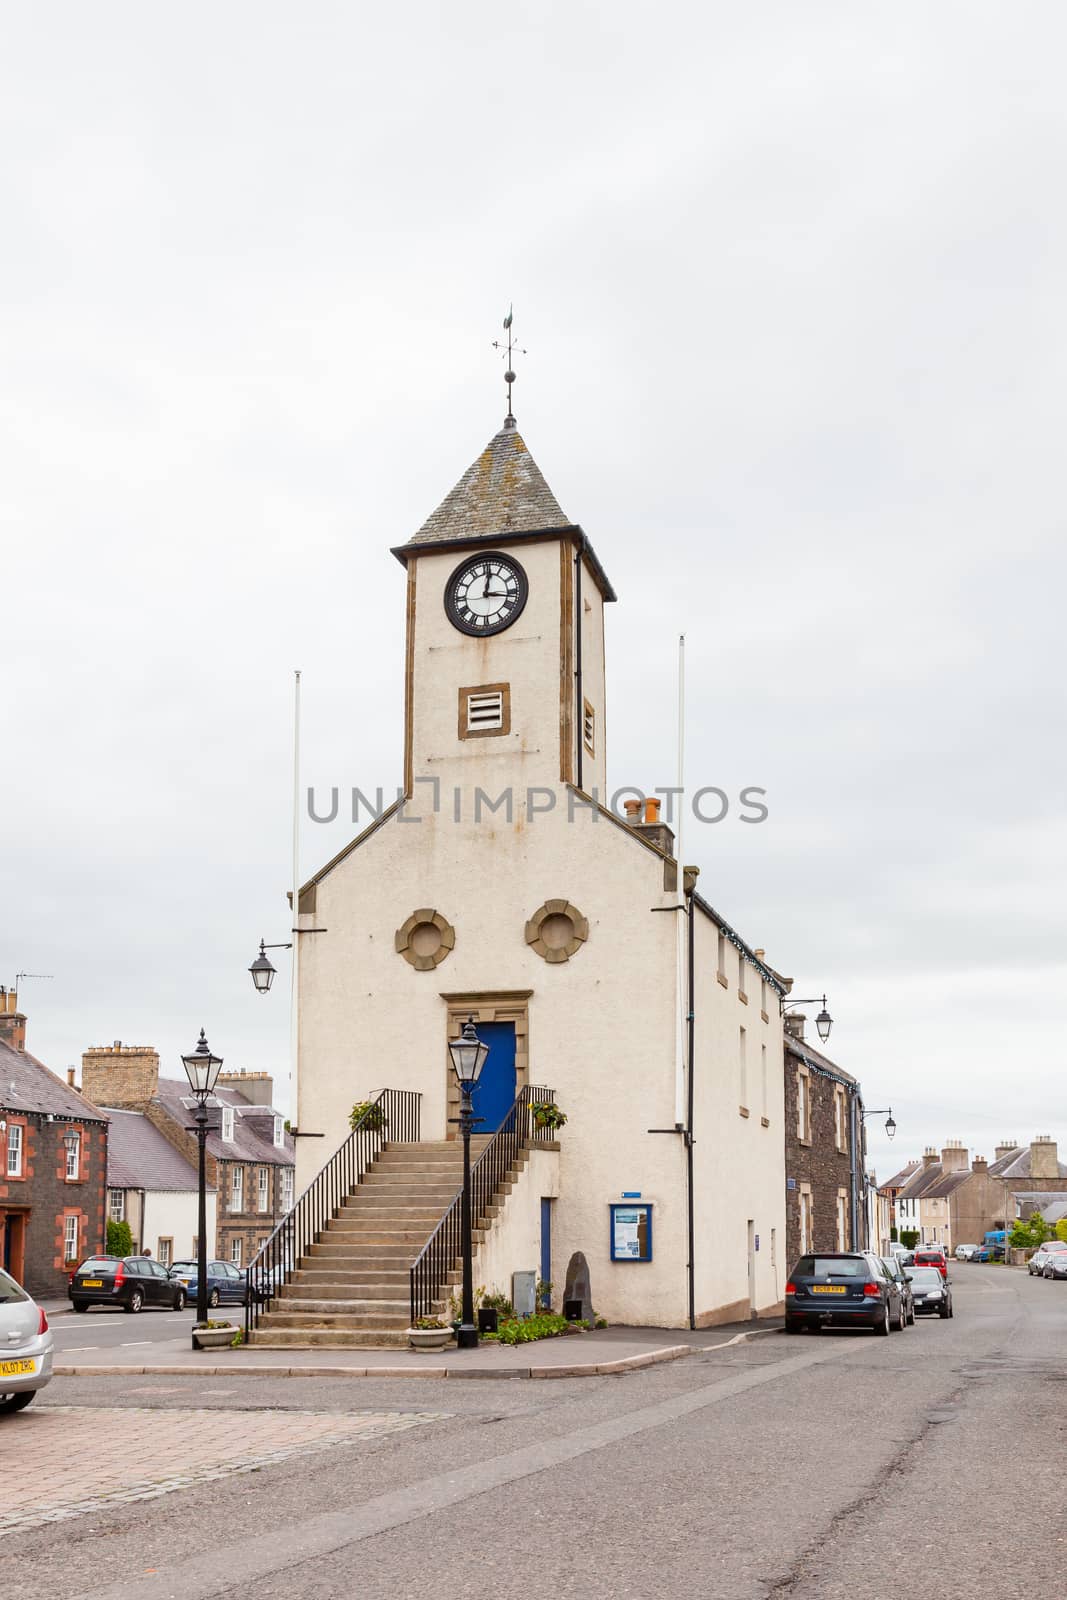 Lauder Town Hall, formerly a tollbooth, is pictured in Lauder town centre in the Scottish Borders.